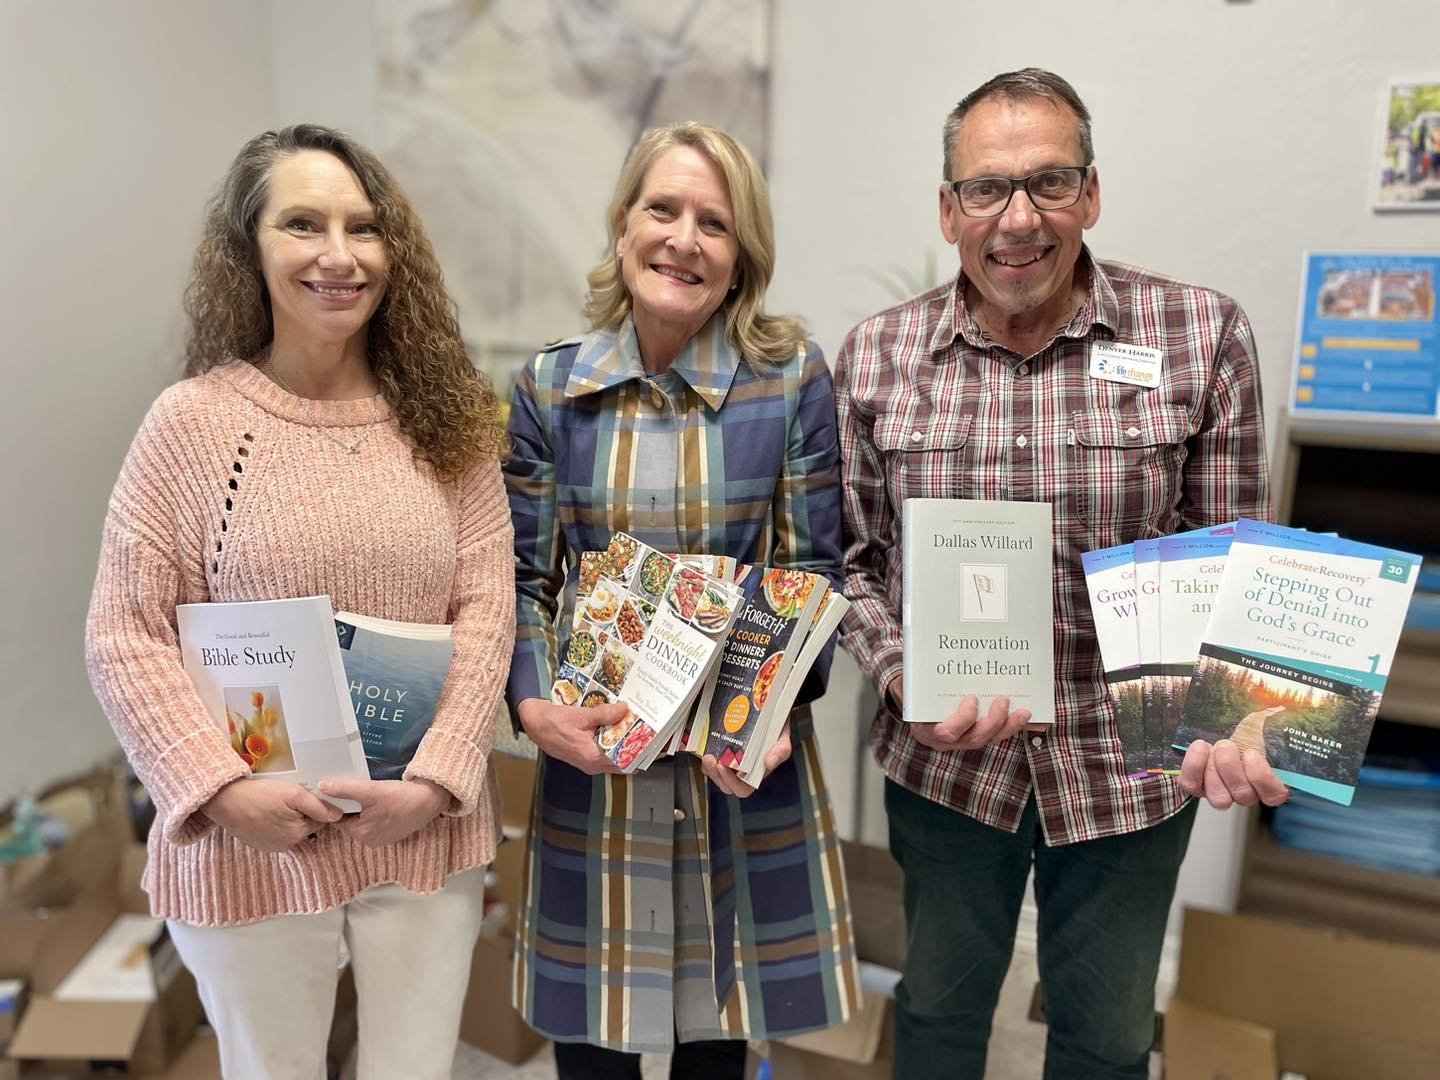 Thank you to the Assistance League of Eugene for a donation of books that will serve our guests at the Eugene Mission in so many ways.
 
The books include study guides used by the Life Change Program that take guests deep into their hearts to underst